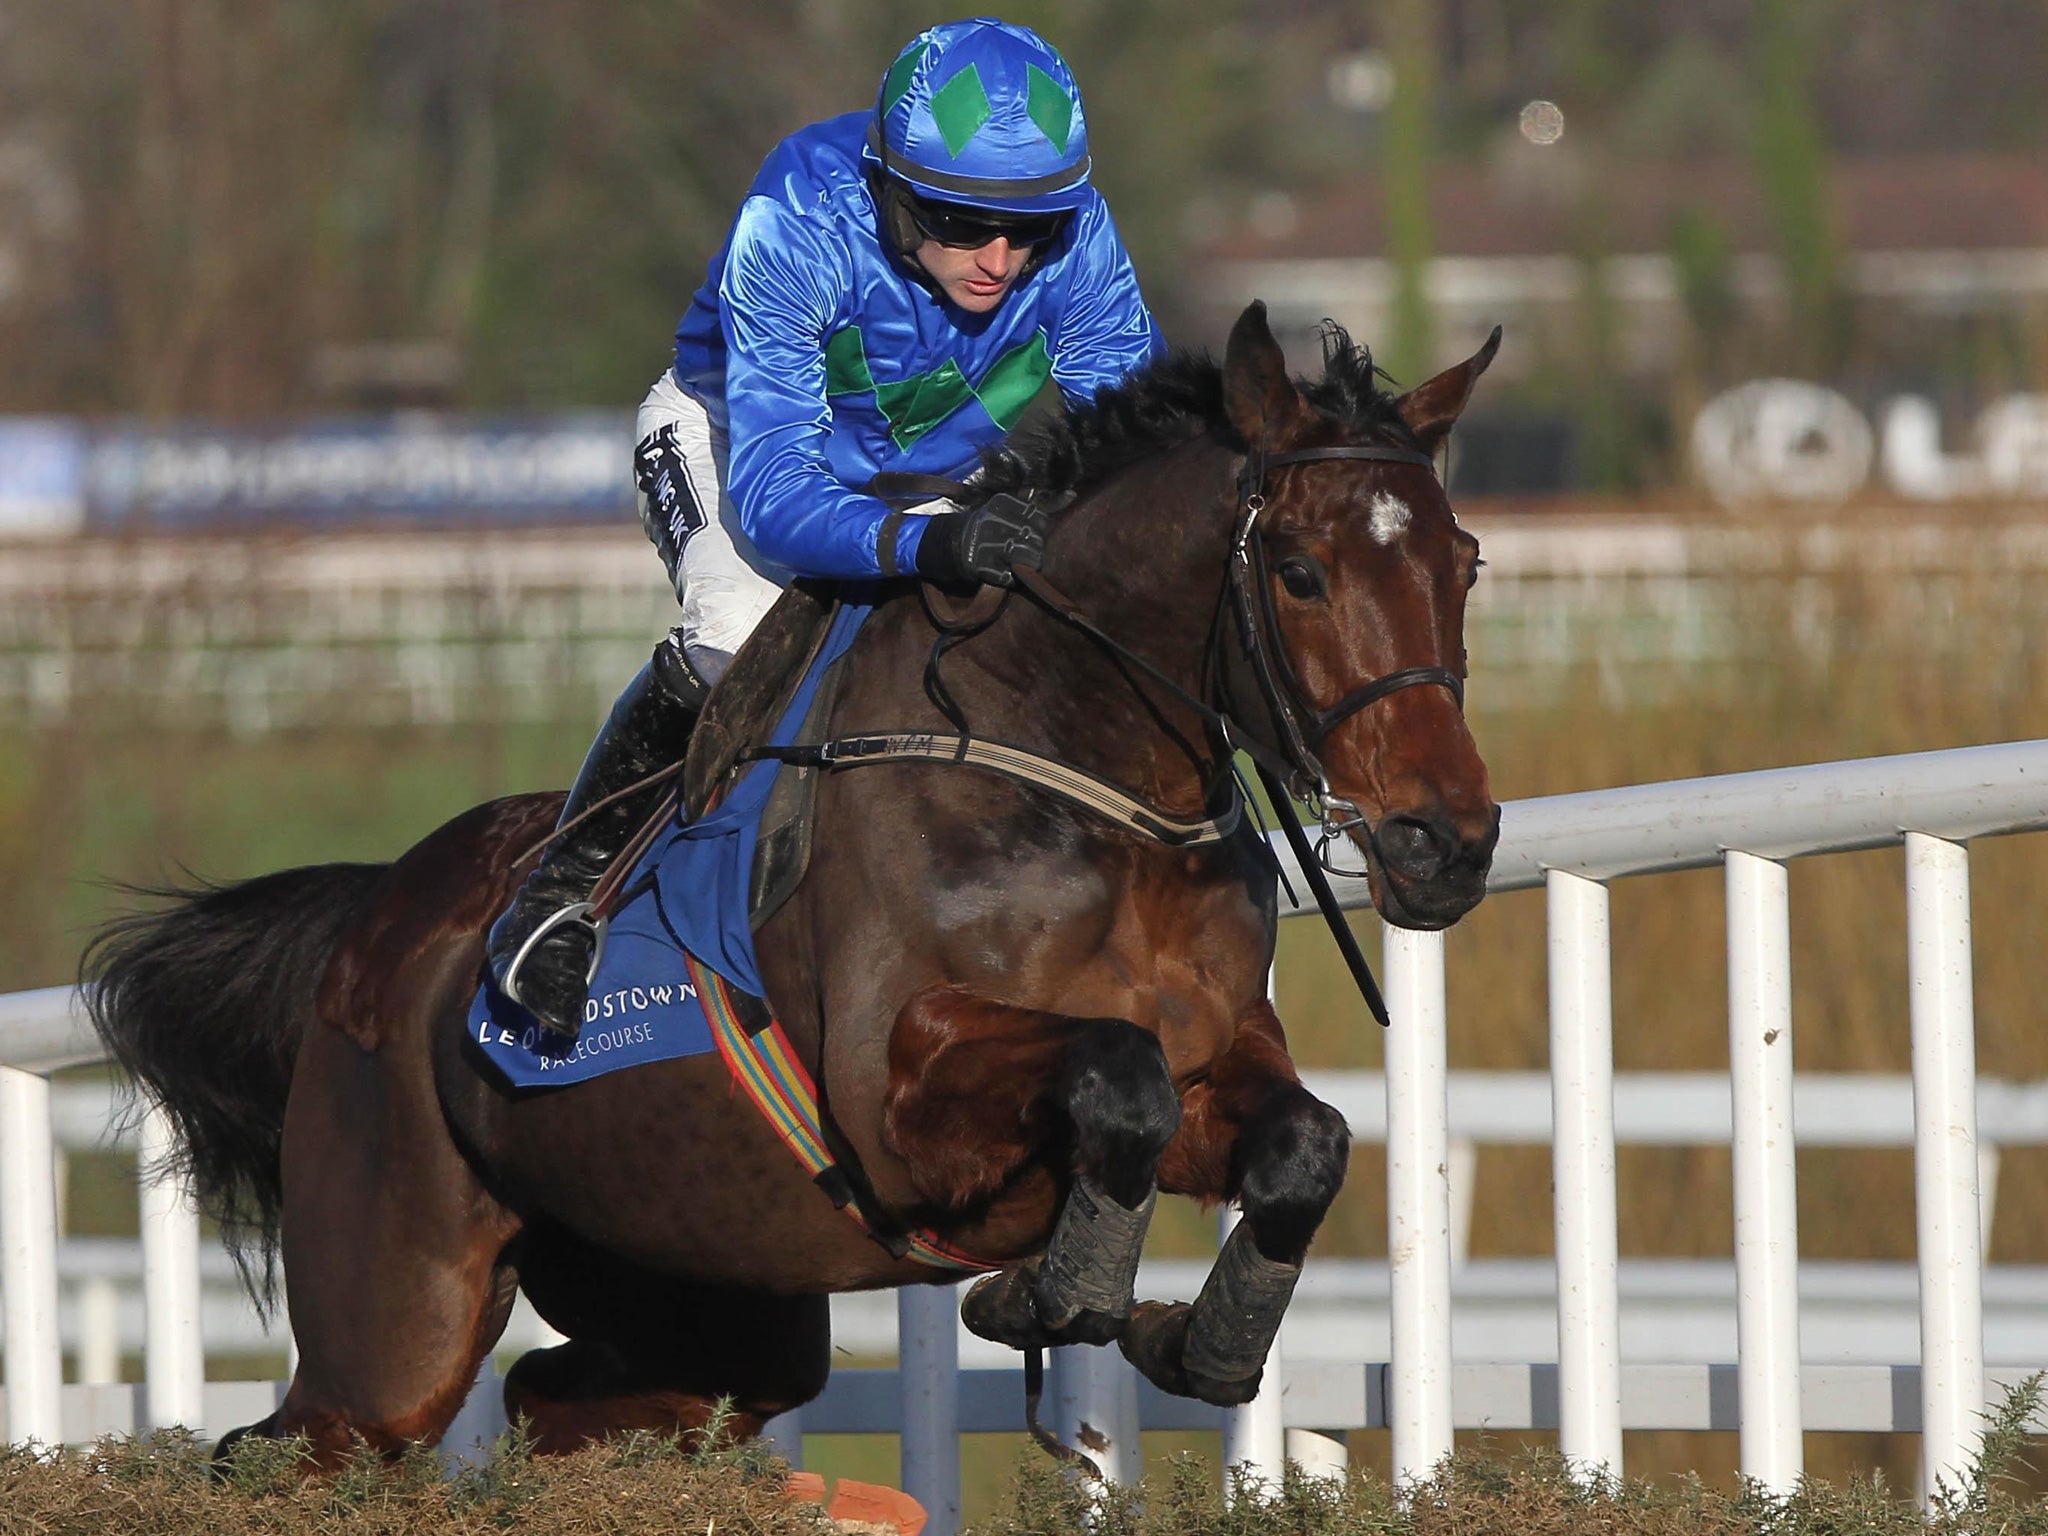 Hurricane Fly gained a bloodless victory in the Istabraq Festival Hurdle at Leopardstown on Saturday